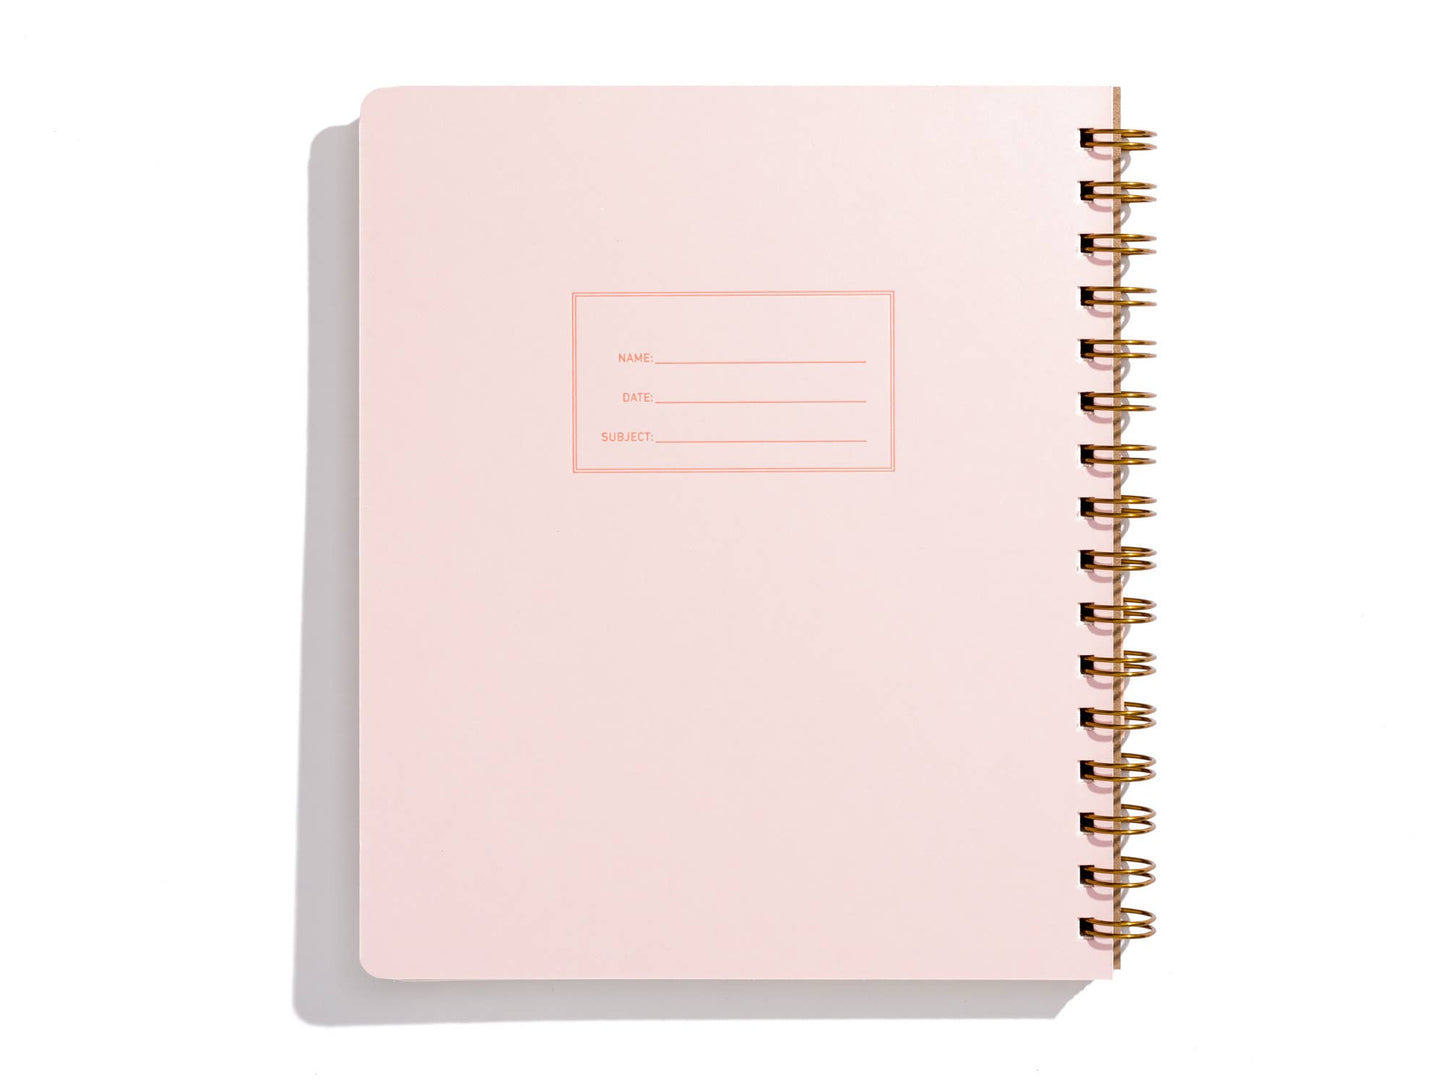 Lefty Standard Notebook - Solid Color Cover: Spruce